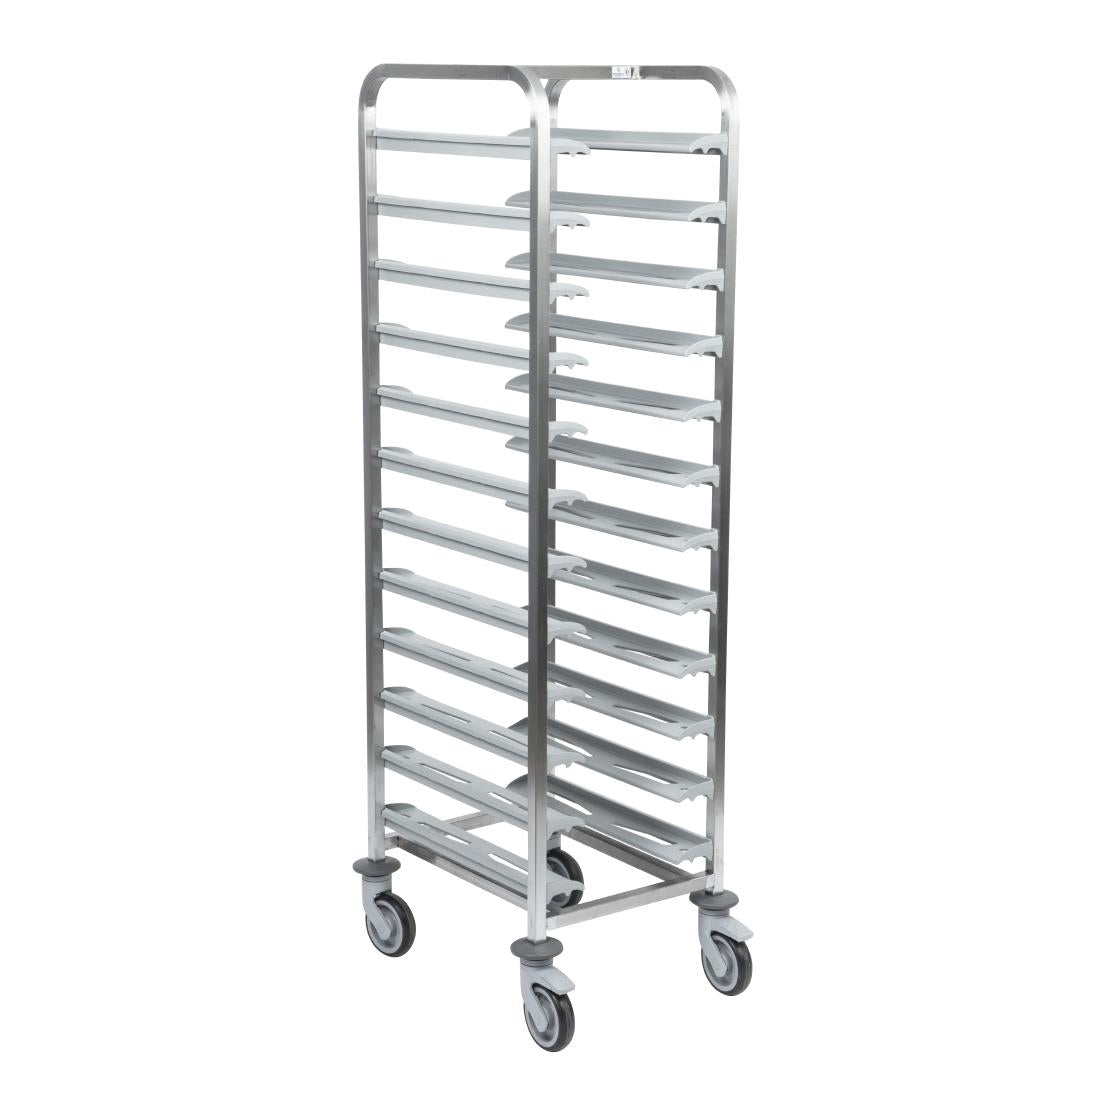 CX726 Matfer Bourgeat 12 Tray Cafeteria Trolley Grey JD Catering Equipment Solutions Ltd